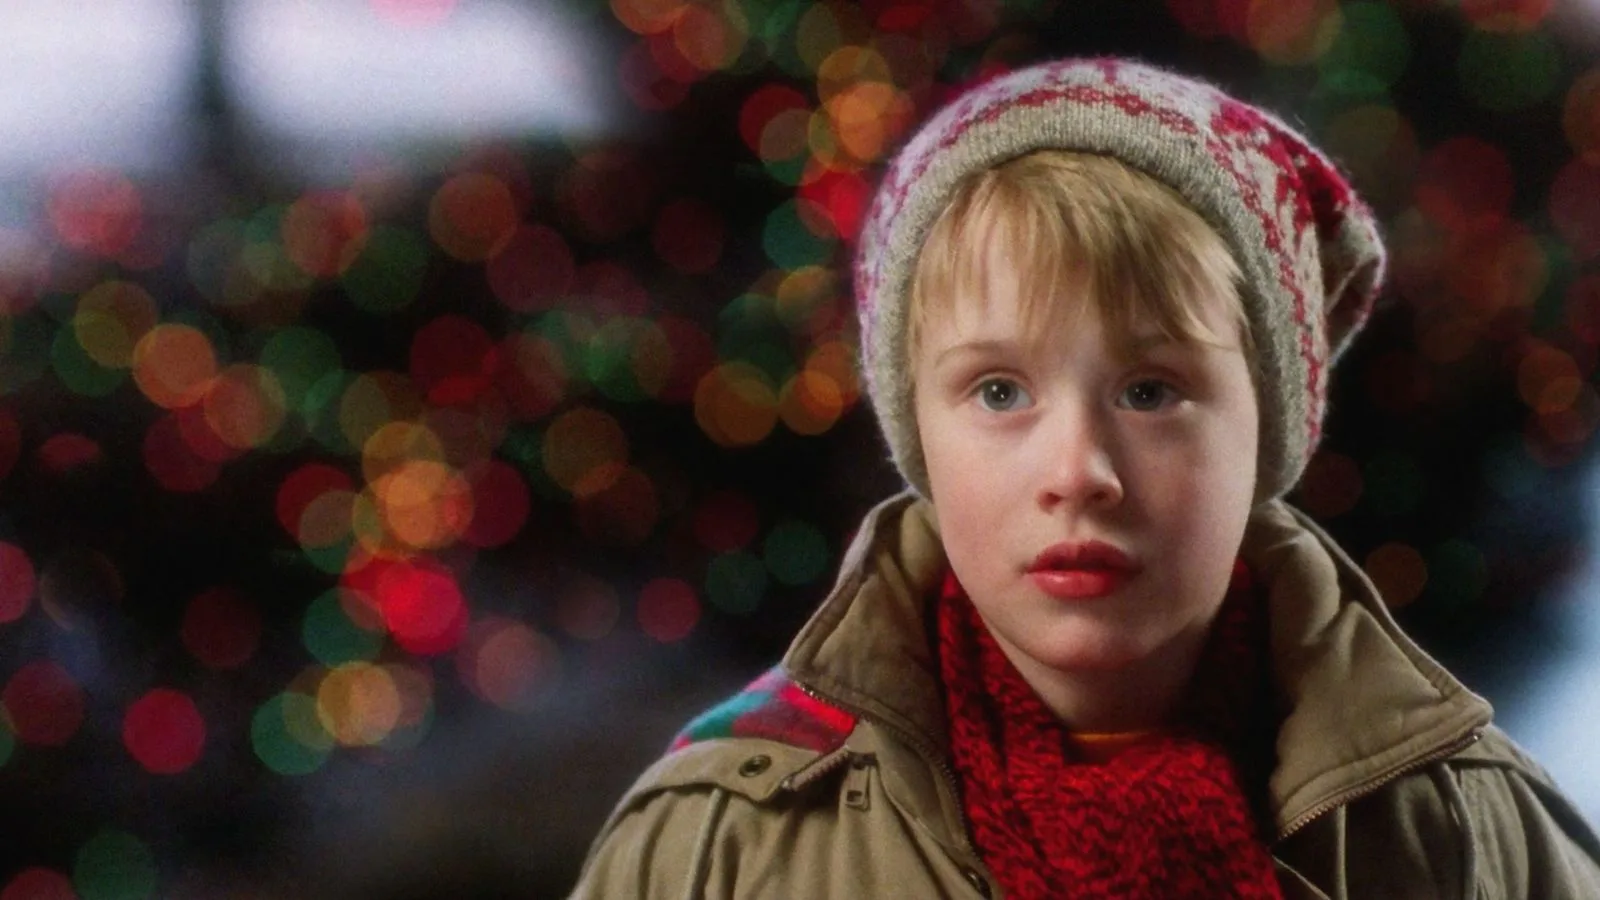 “Home Alone”: a musical journey through the Christmas soundtrack